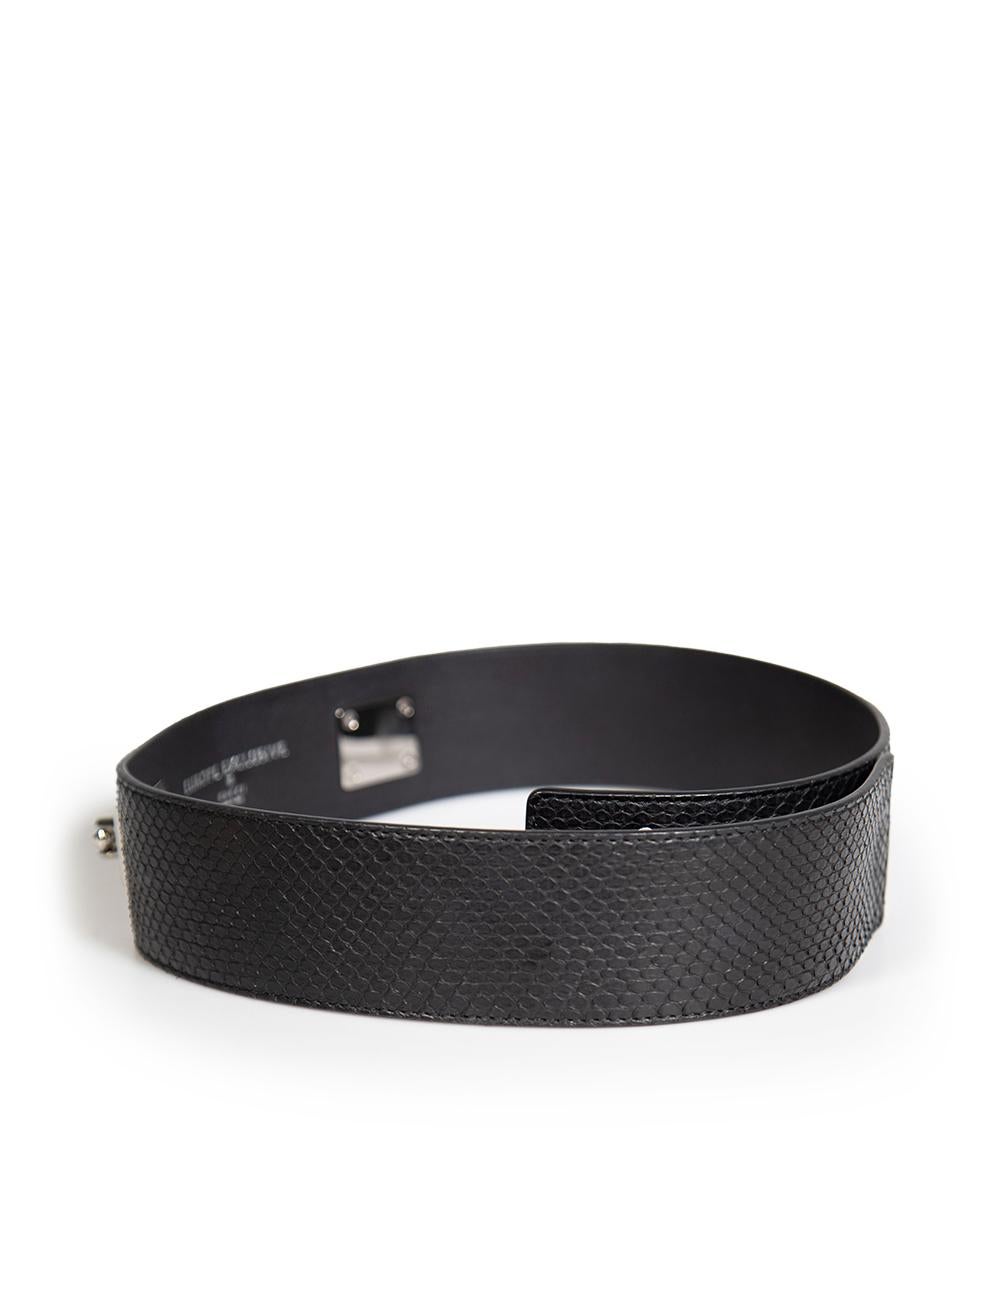 CONDITION is Very good. Minimal wear to the belt is evident. Minimal wear to the front is seen with an indent under the silver detailing on this used Gucci designer resale item. This item comes with an original dust bag.
 
 
 
 Details
 
 
 Europe